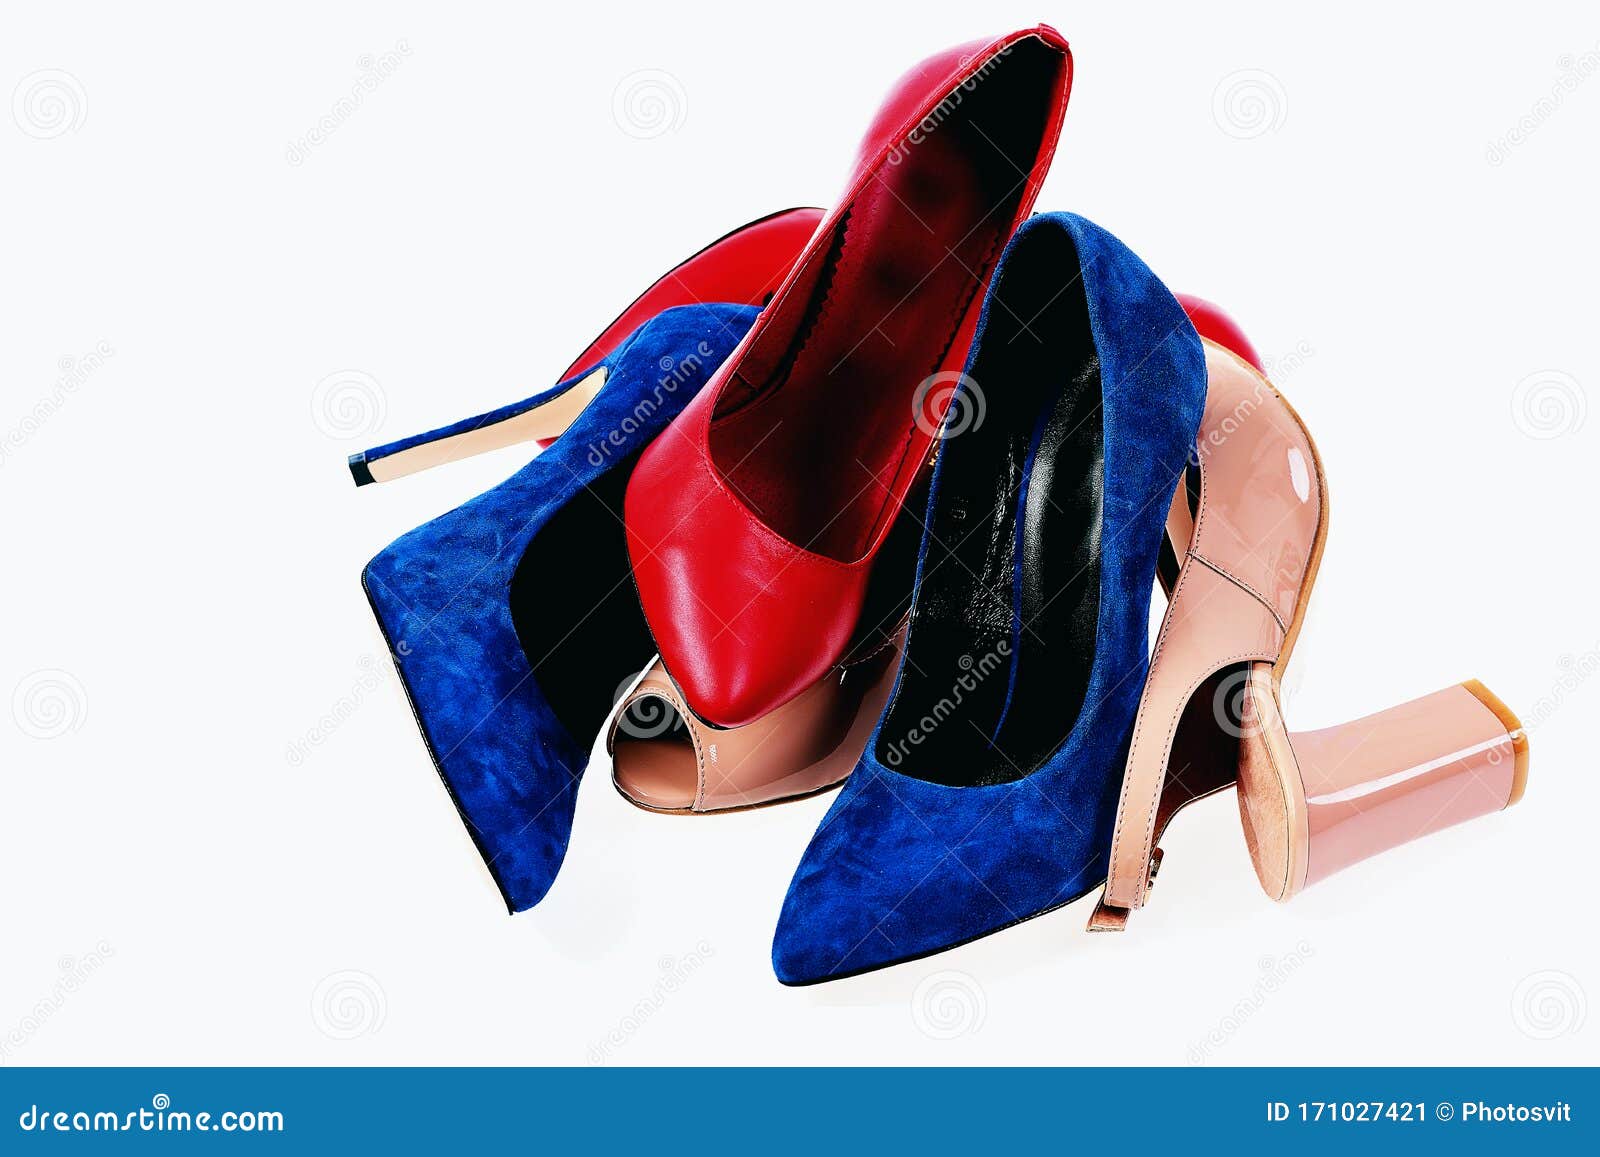 andy leiter recommends pile of high heels pic